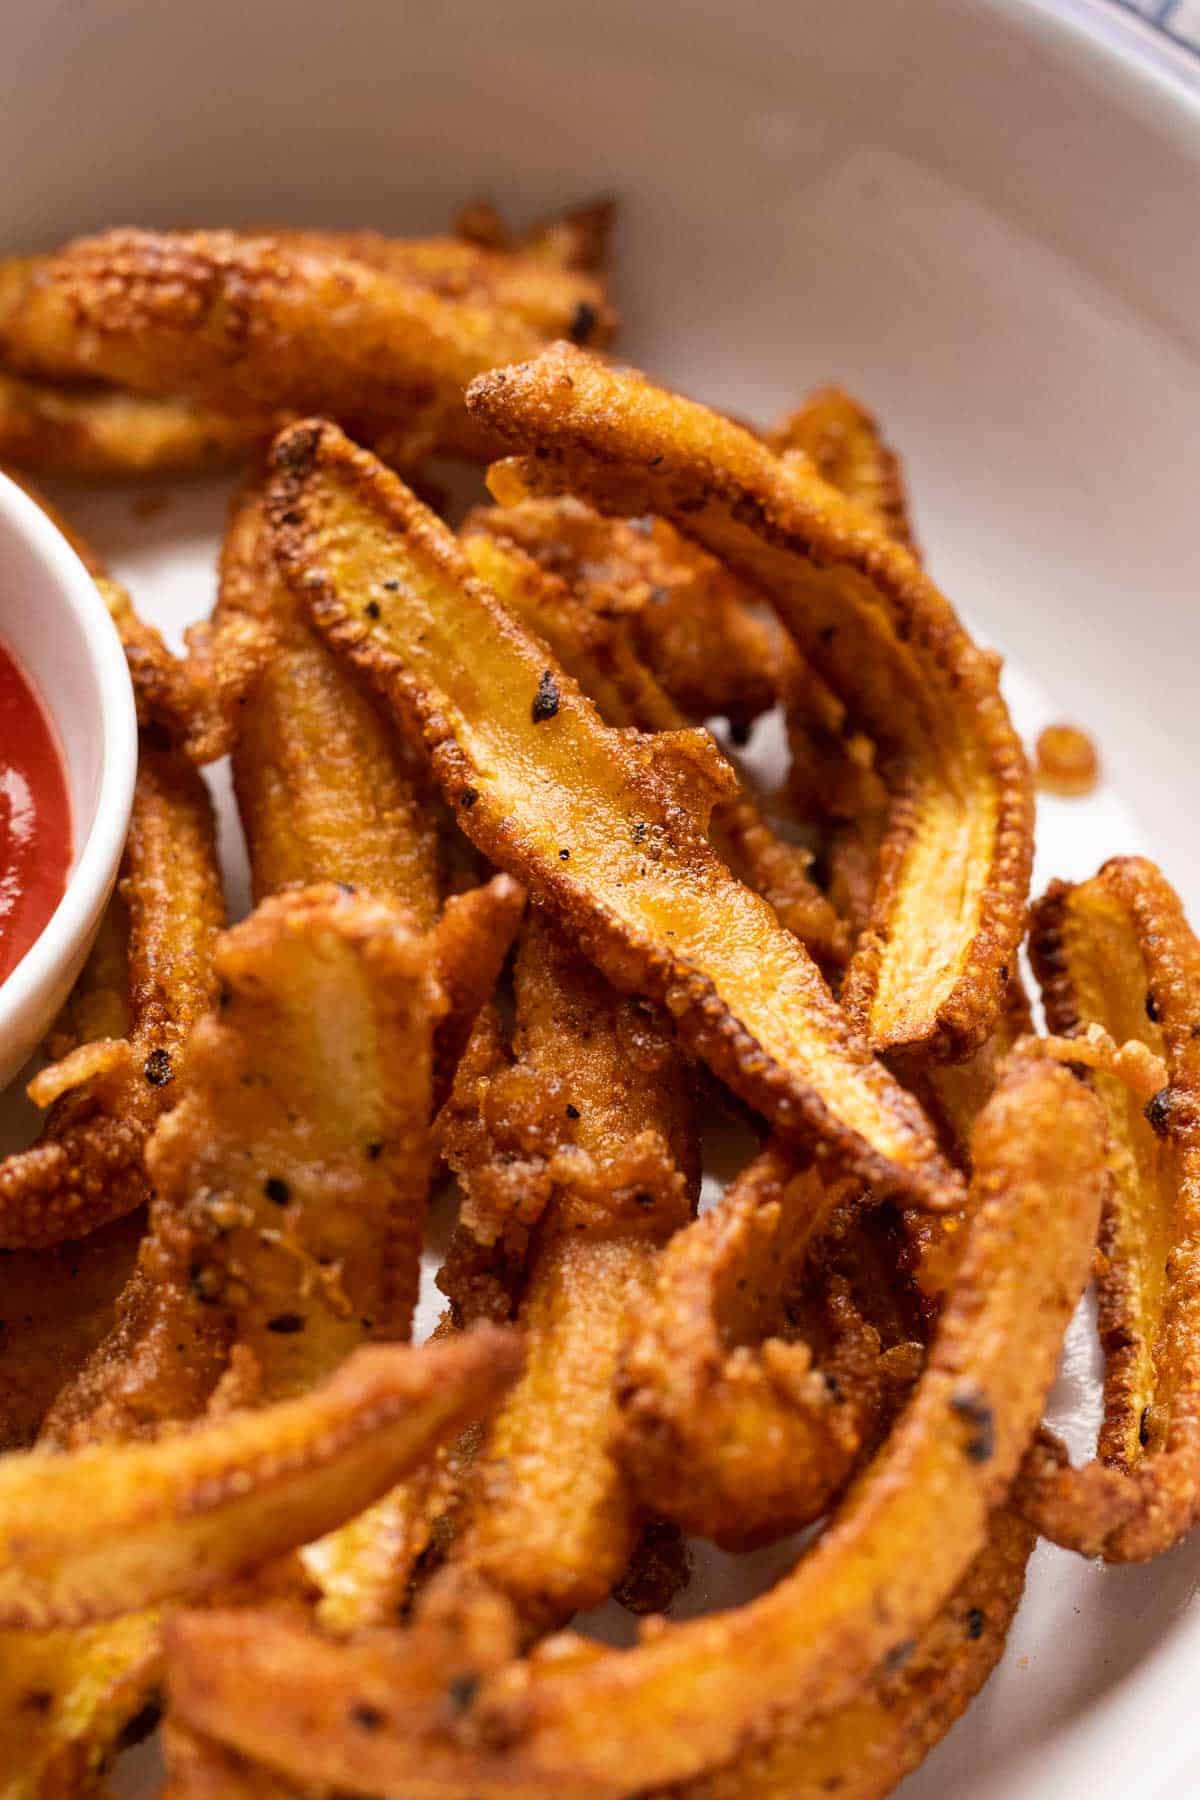 Closeup of crispy baby corn fry served in a white plate with ketchup on the side